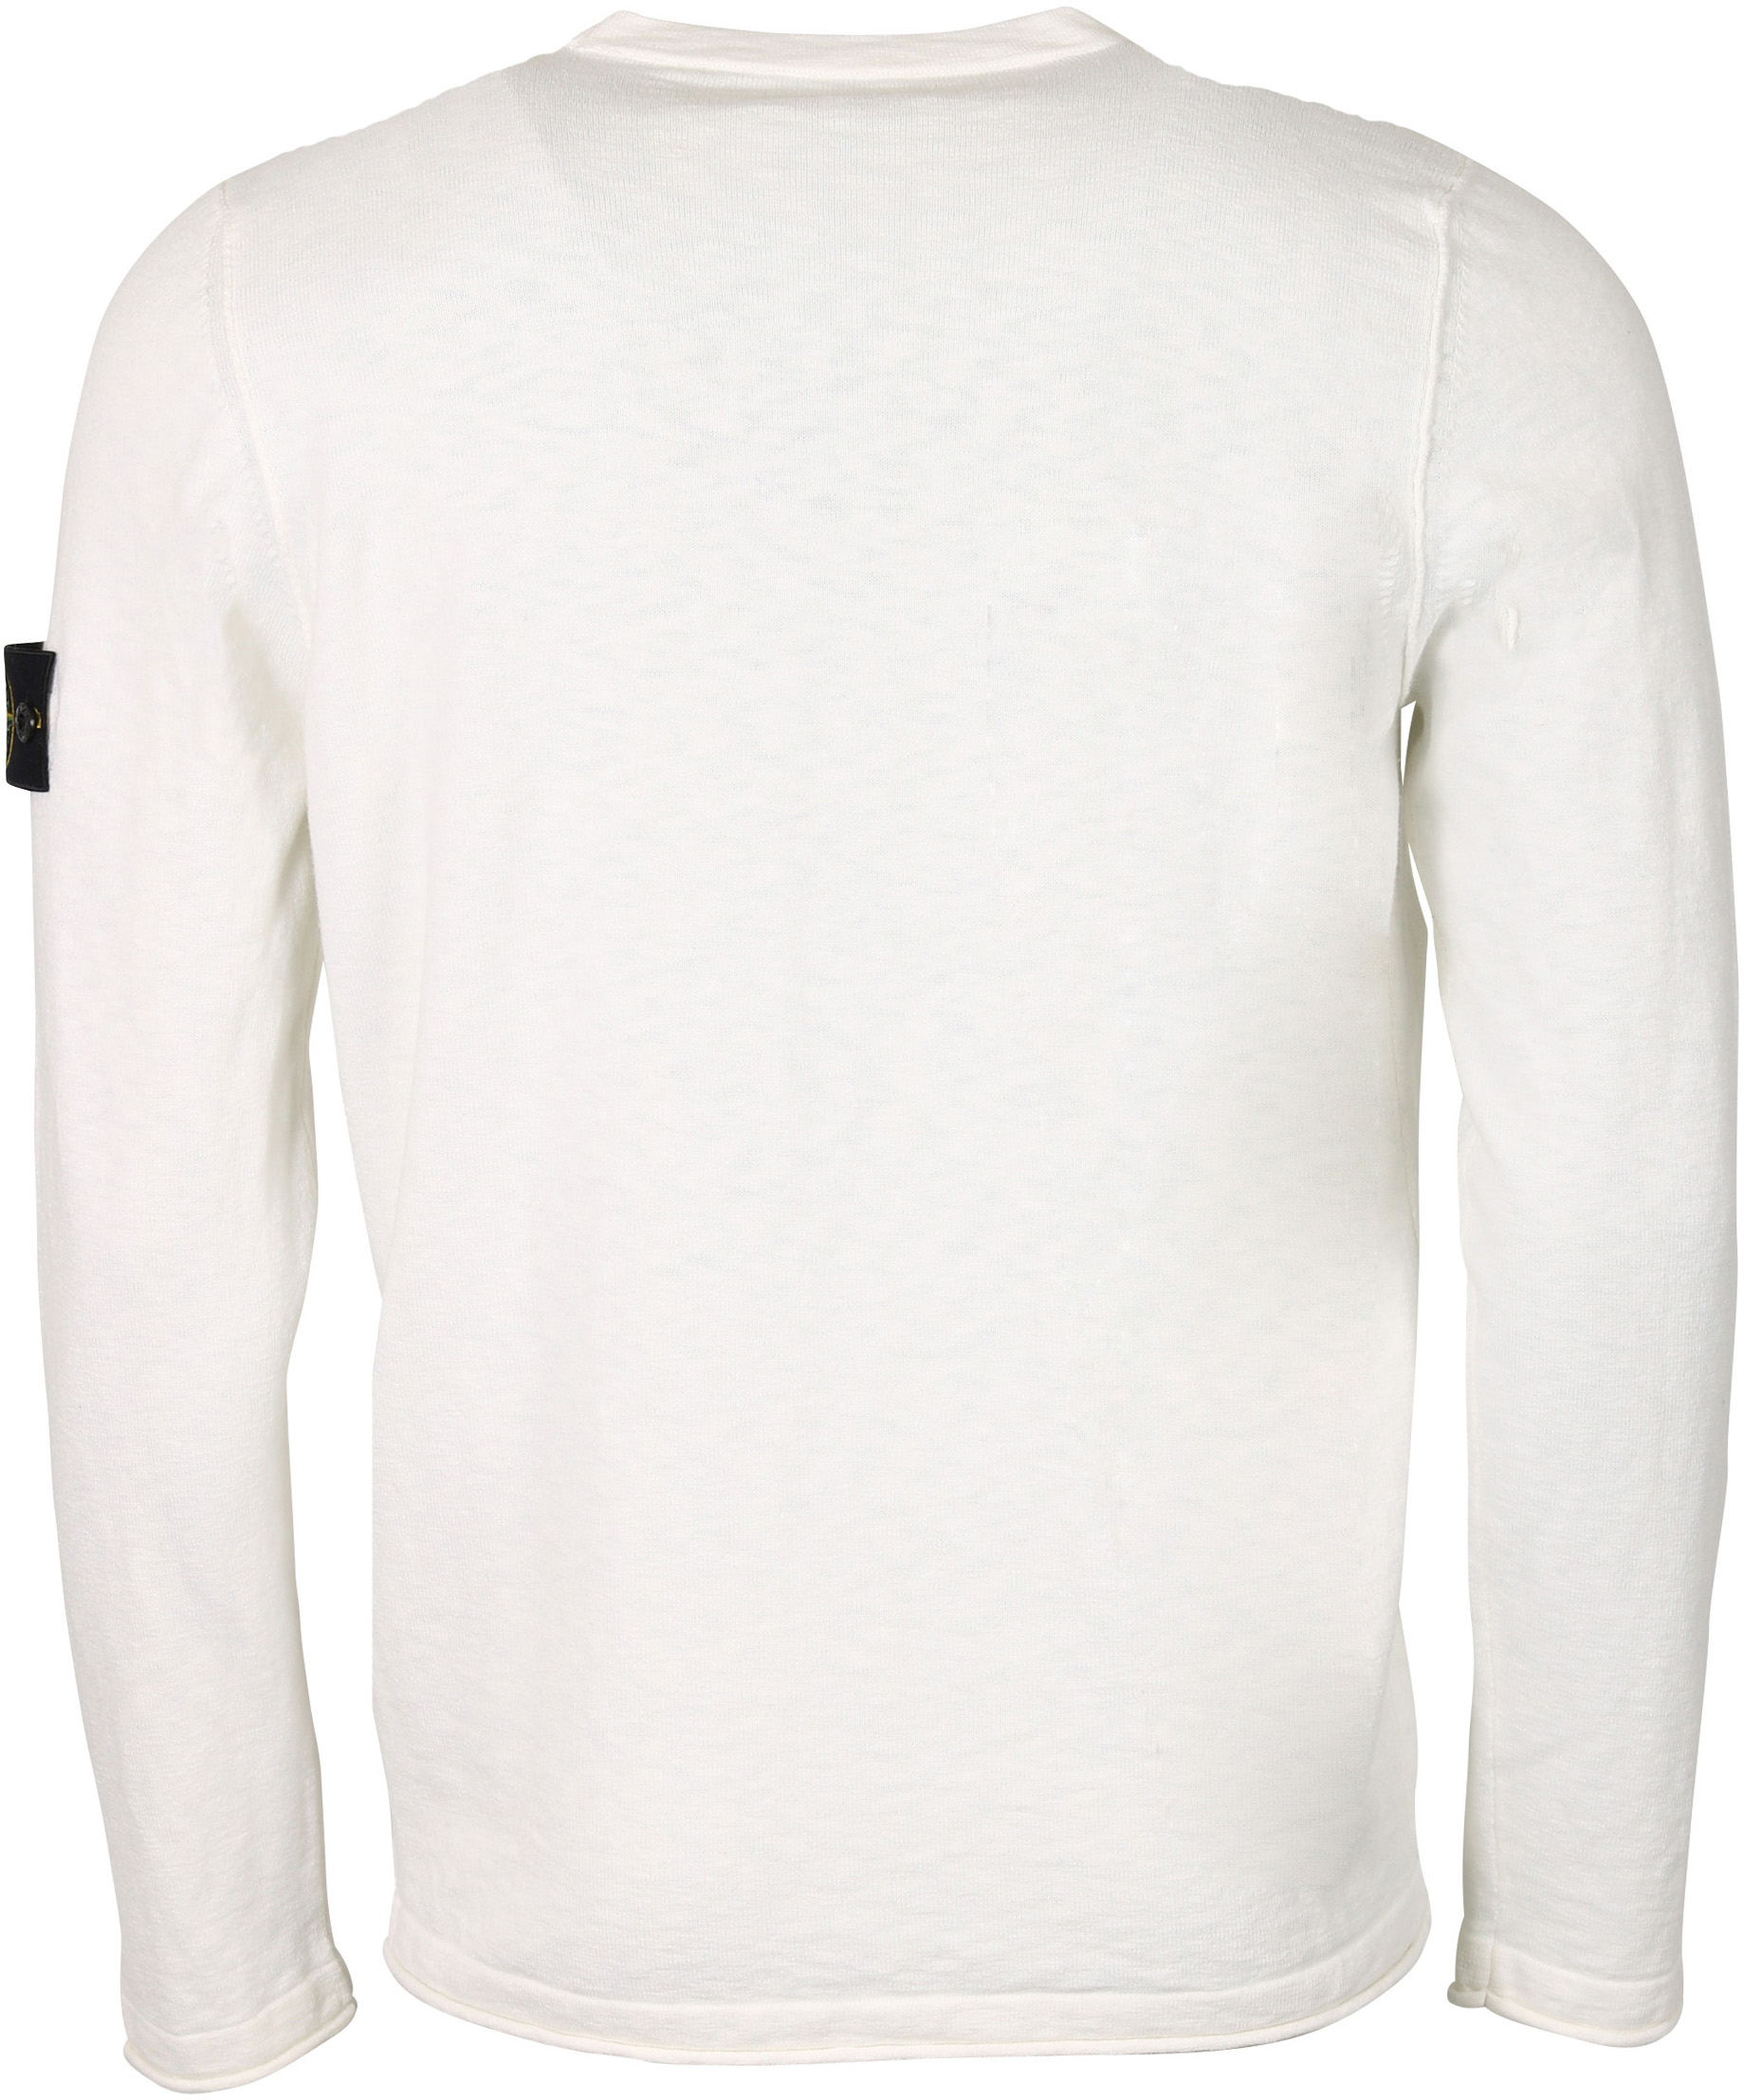 Stone Island Knit Sweater in White